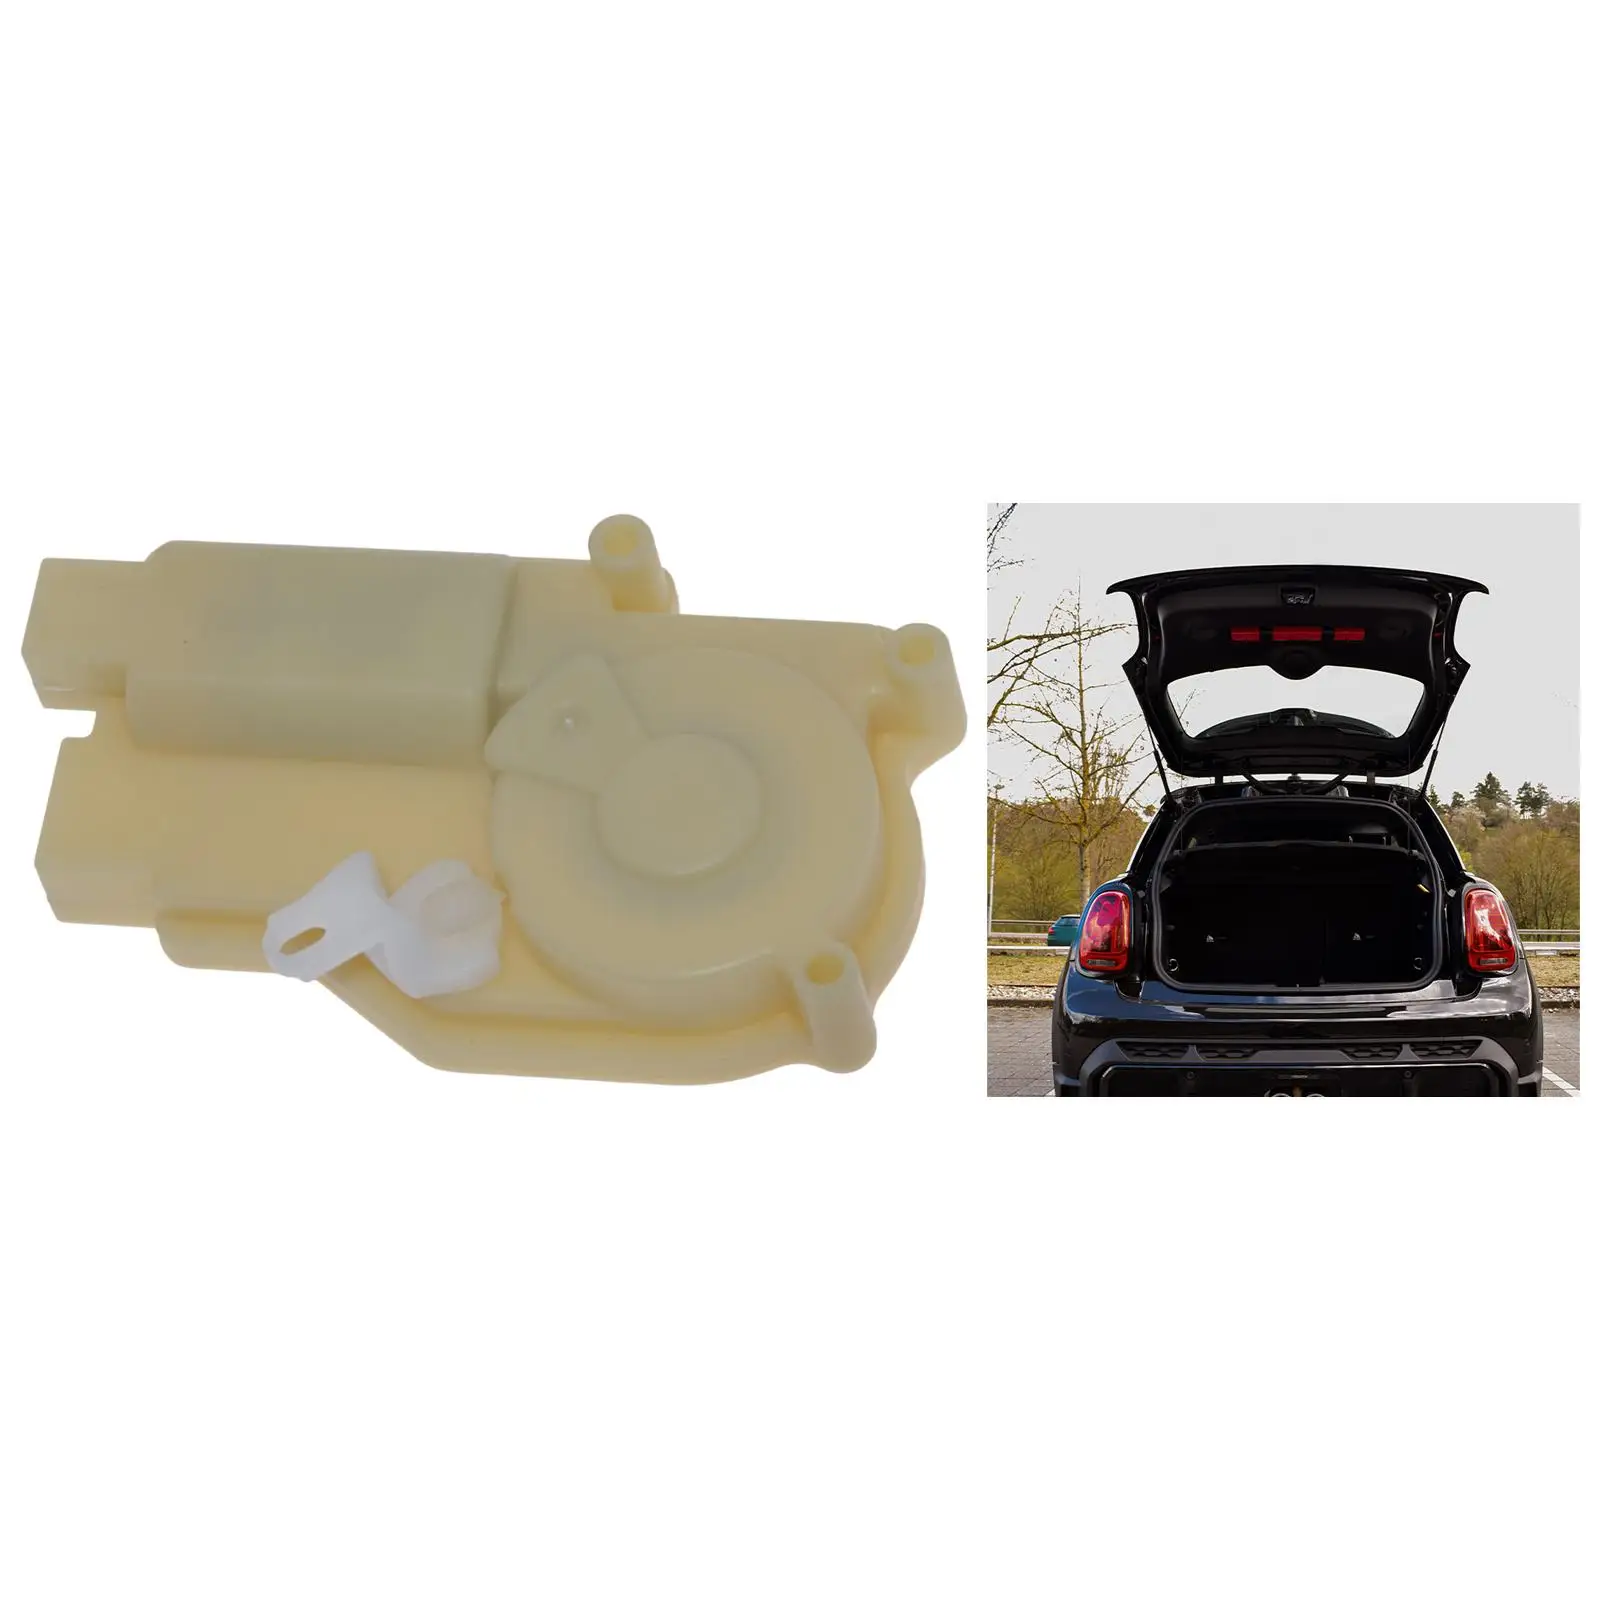 74896Saa003 Tail Gate Lock Actuator Motor, Accessory, Replaces Spare Parts, High